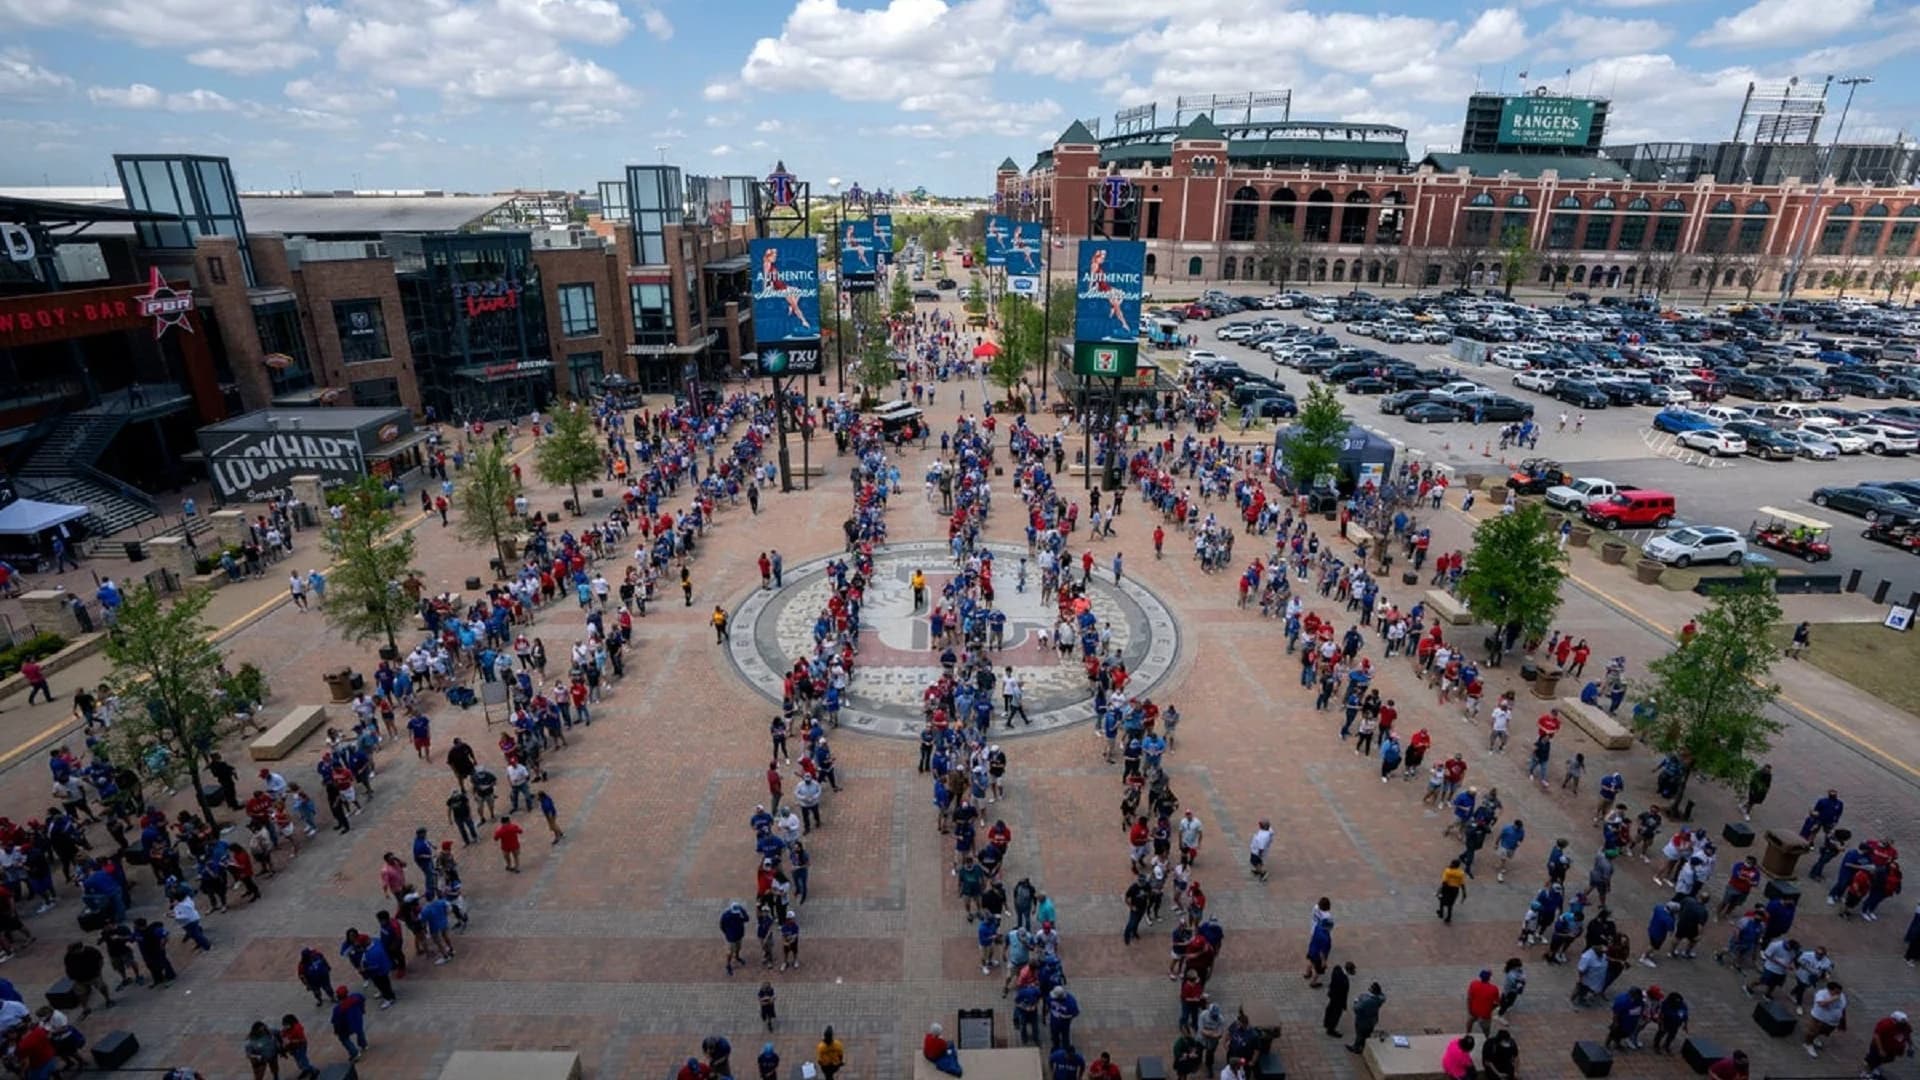 Texas Rangers fans accept 'calculated risk', fill stands for sellout game